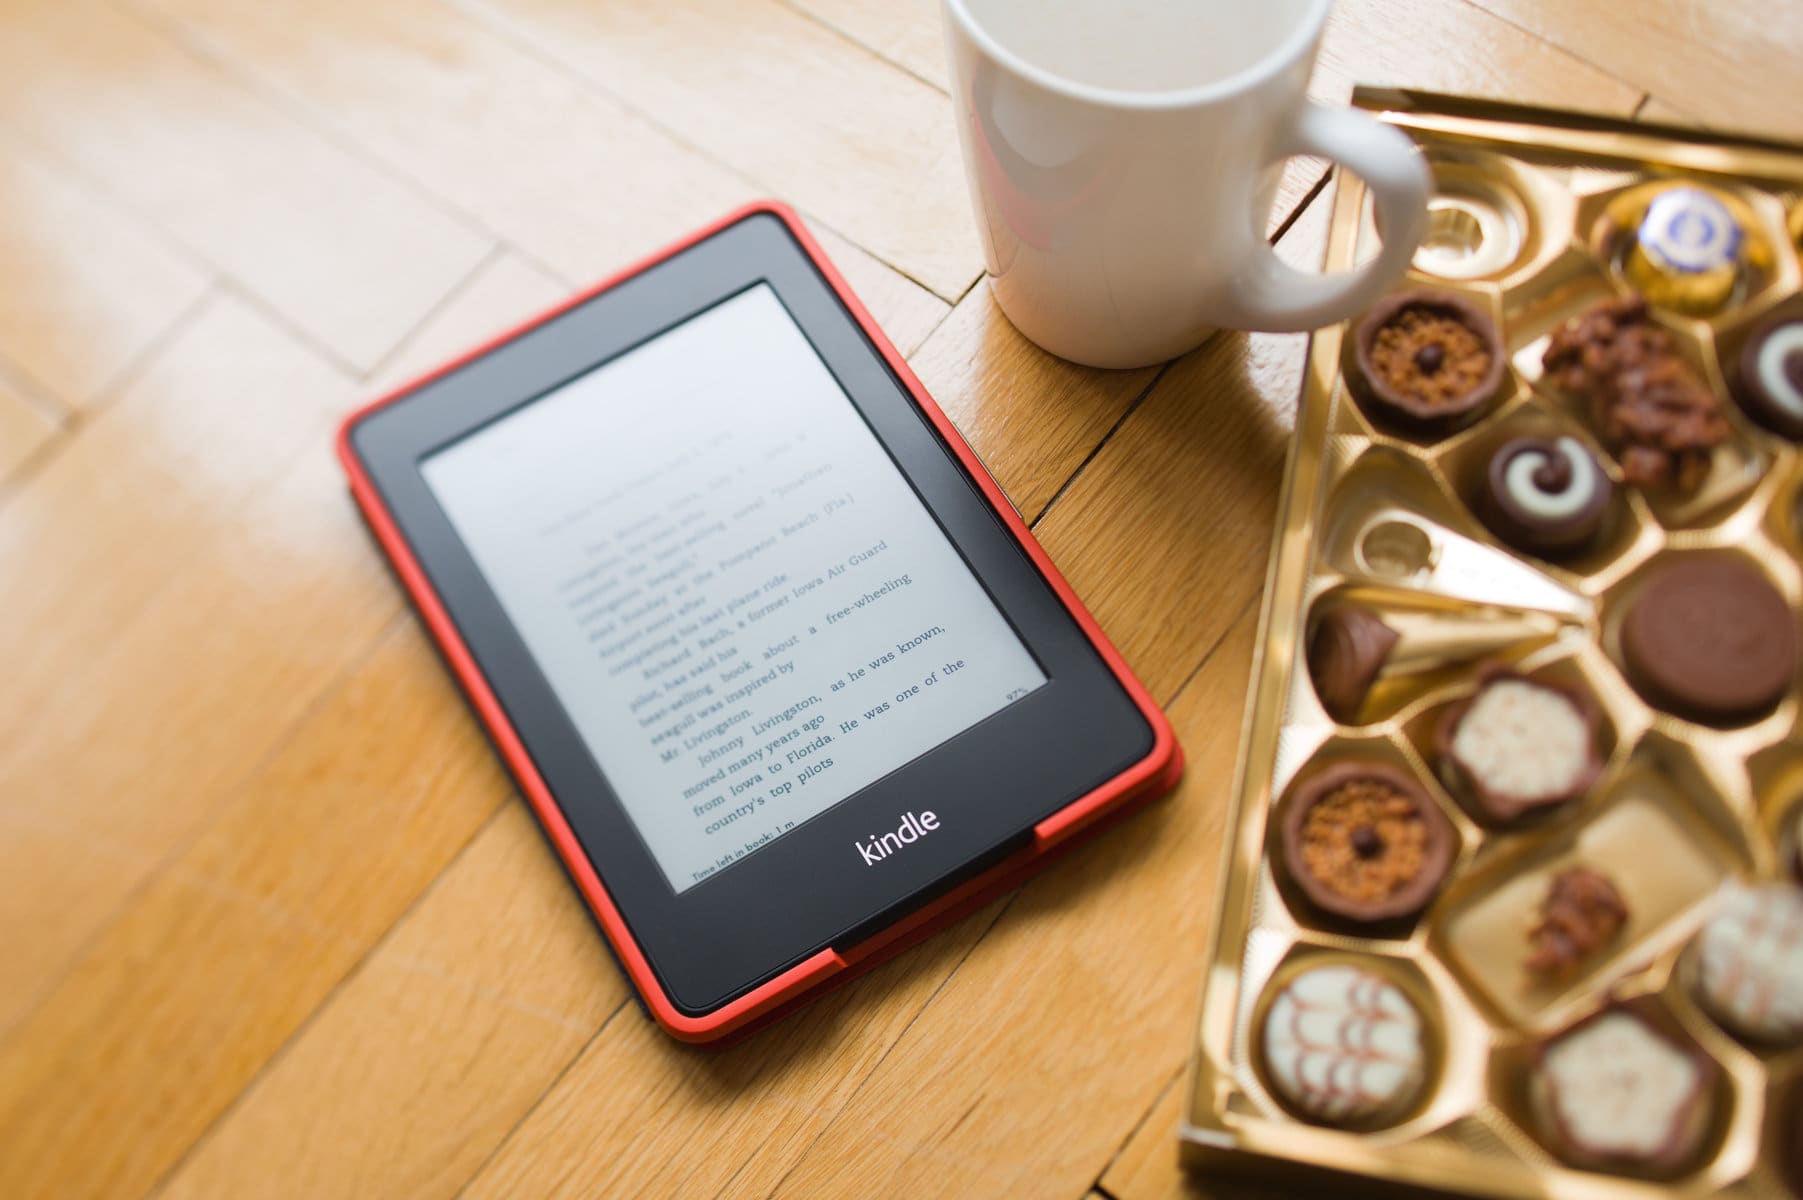 HOW TO SHARE BOOKS ON KINDLE: A Visual Tutorial On How To Share